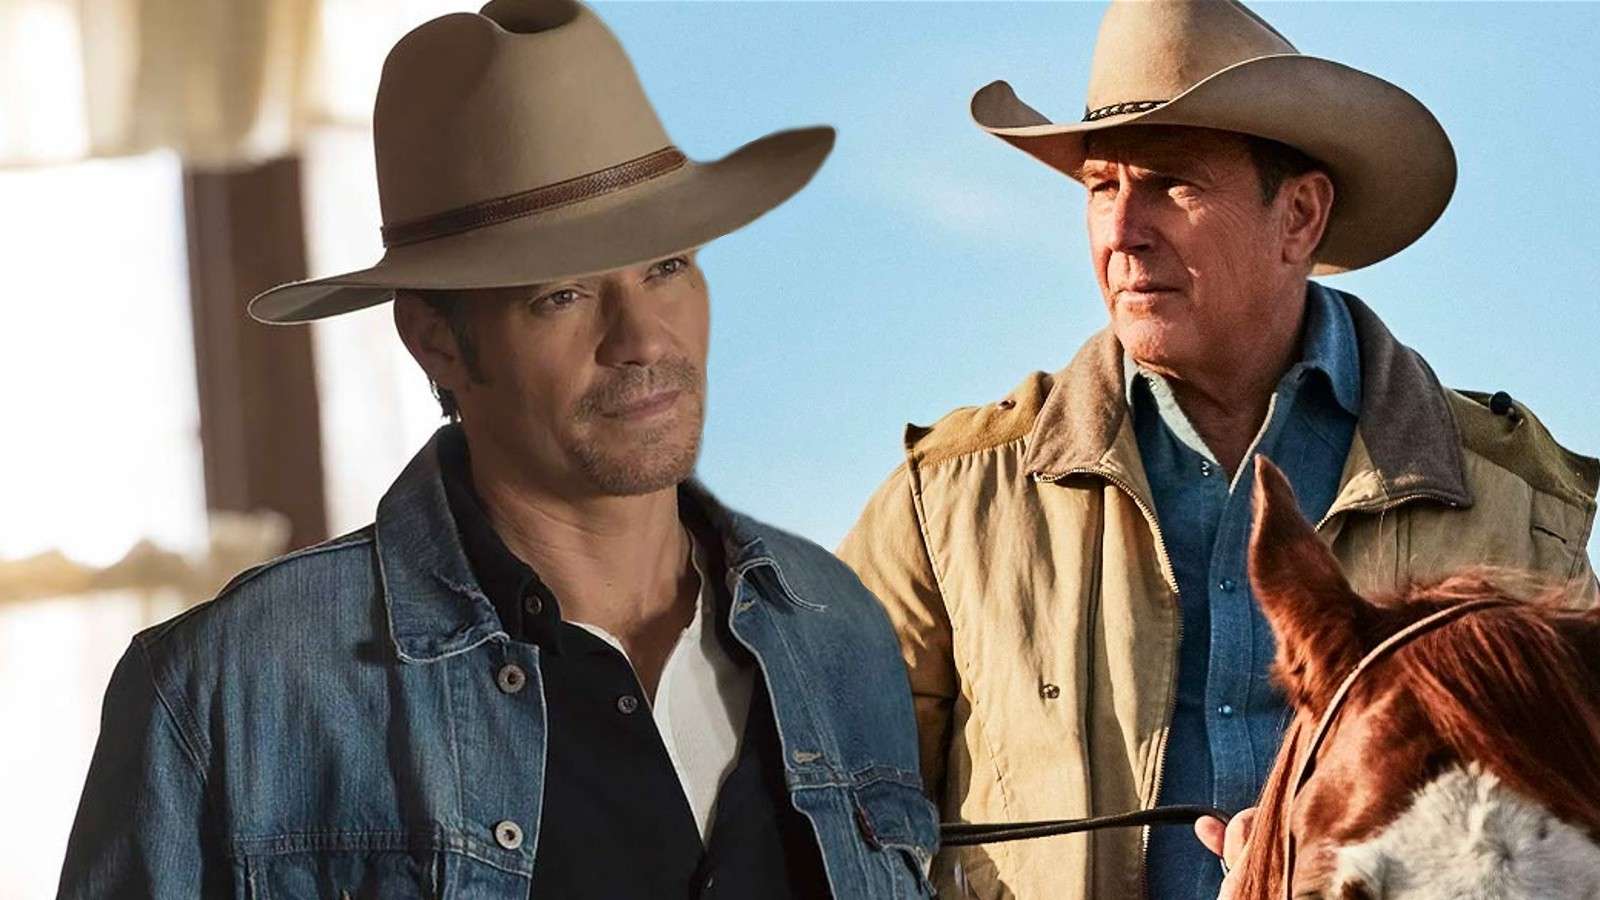 Timothy Olyphant in Justified and Kevin Costner in Yellowstone